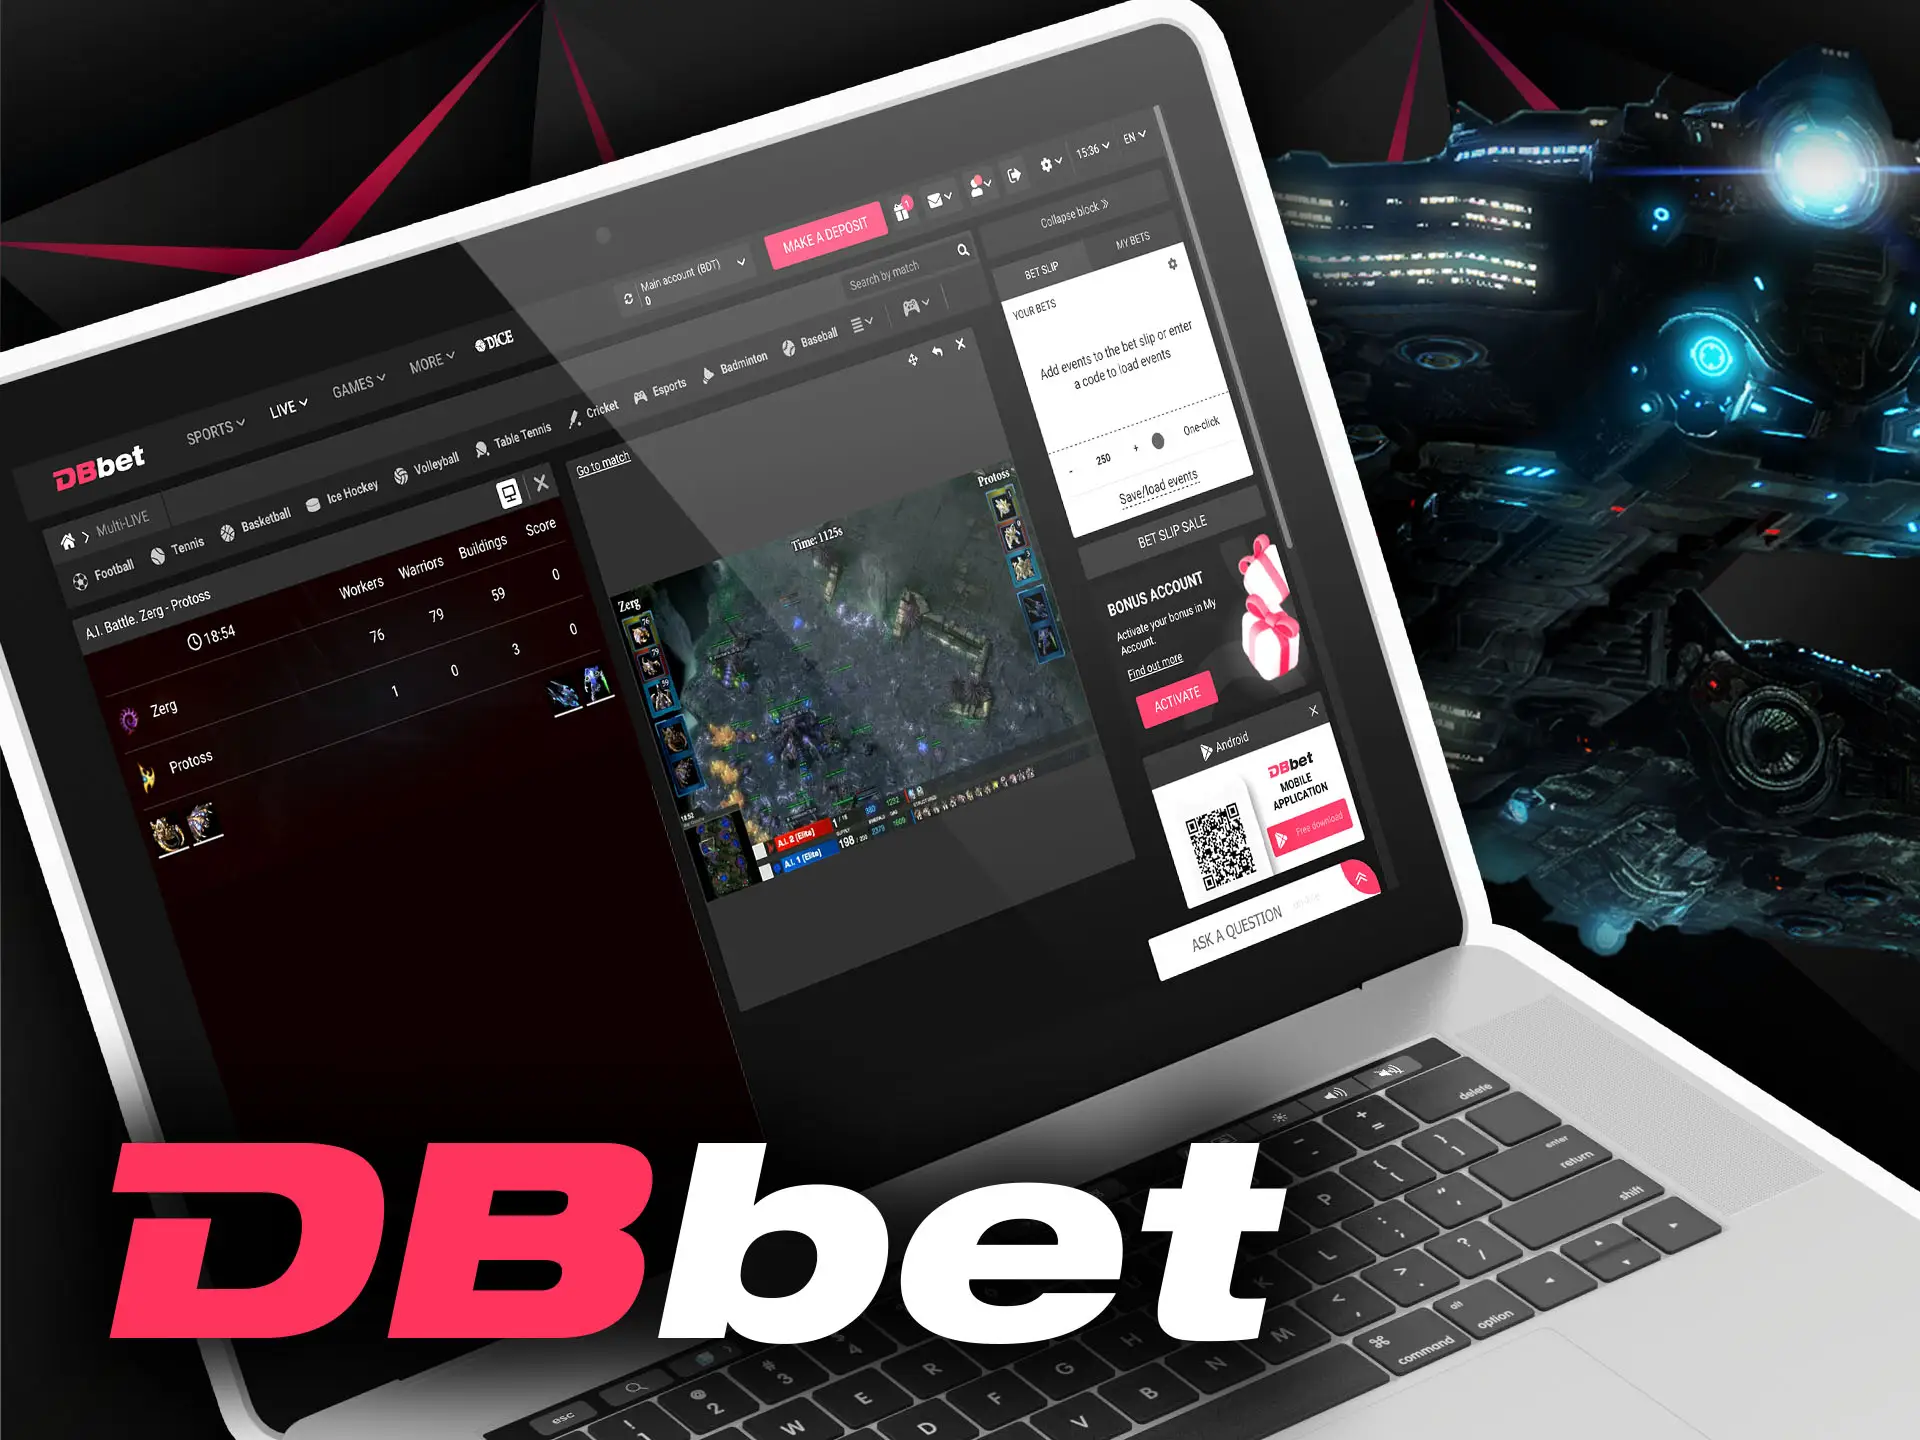 Starcraft is also among the cybersports disciplines to bet on.